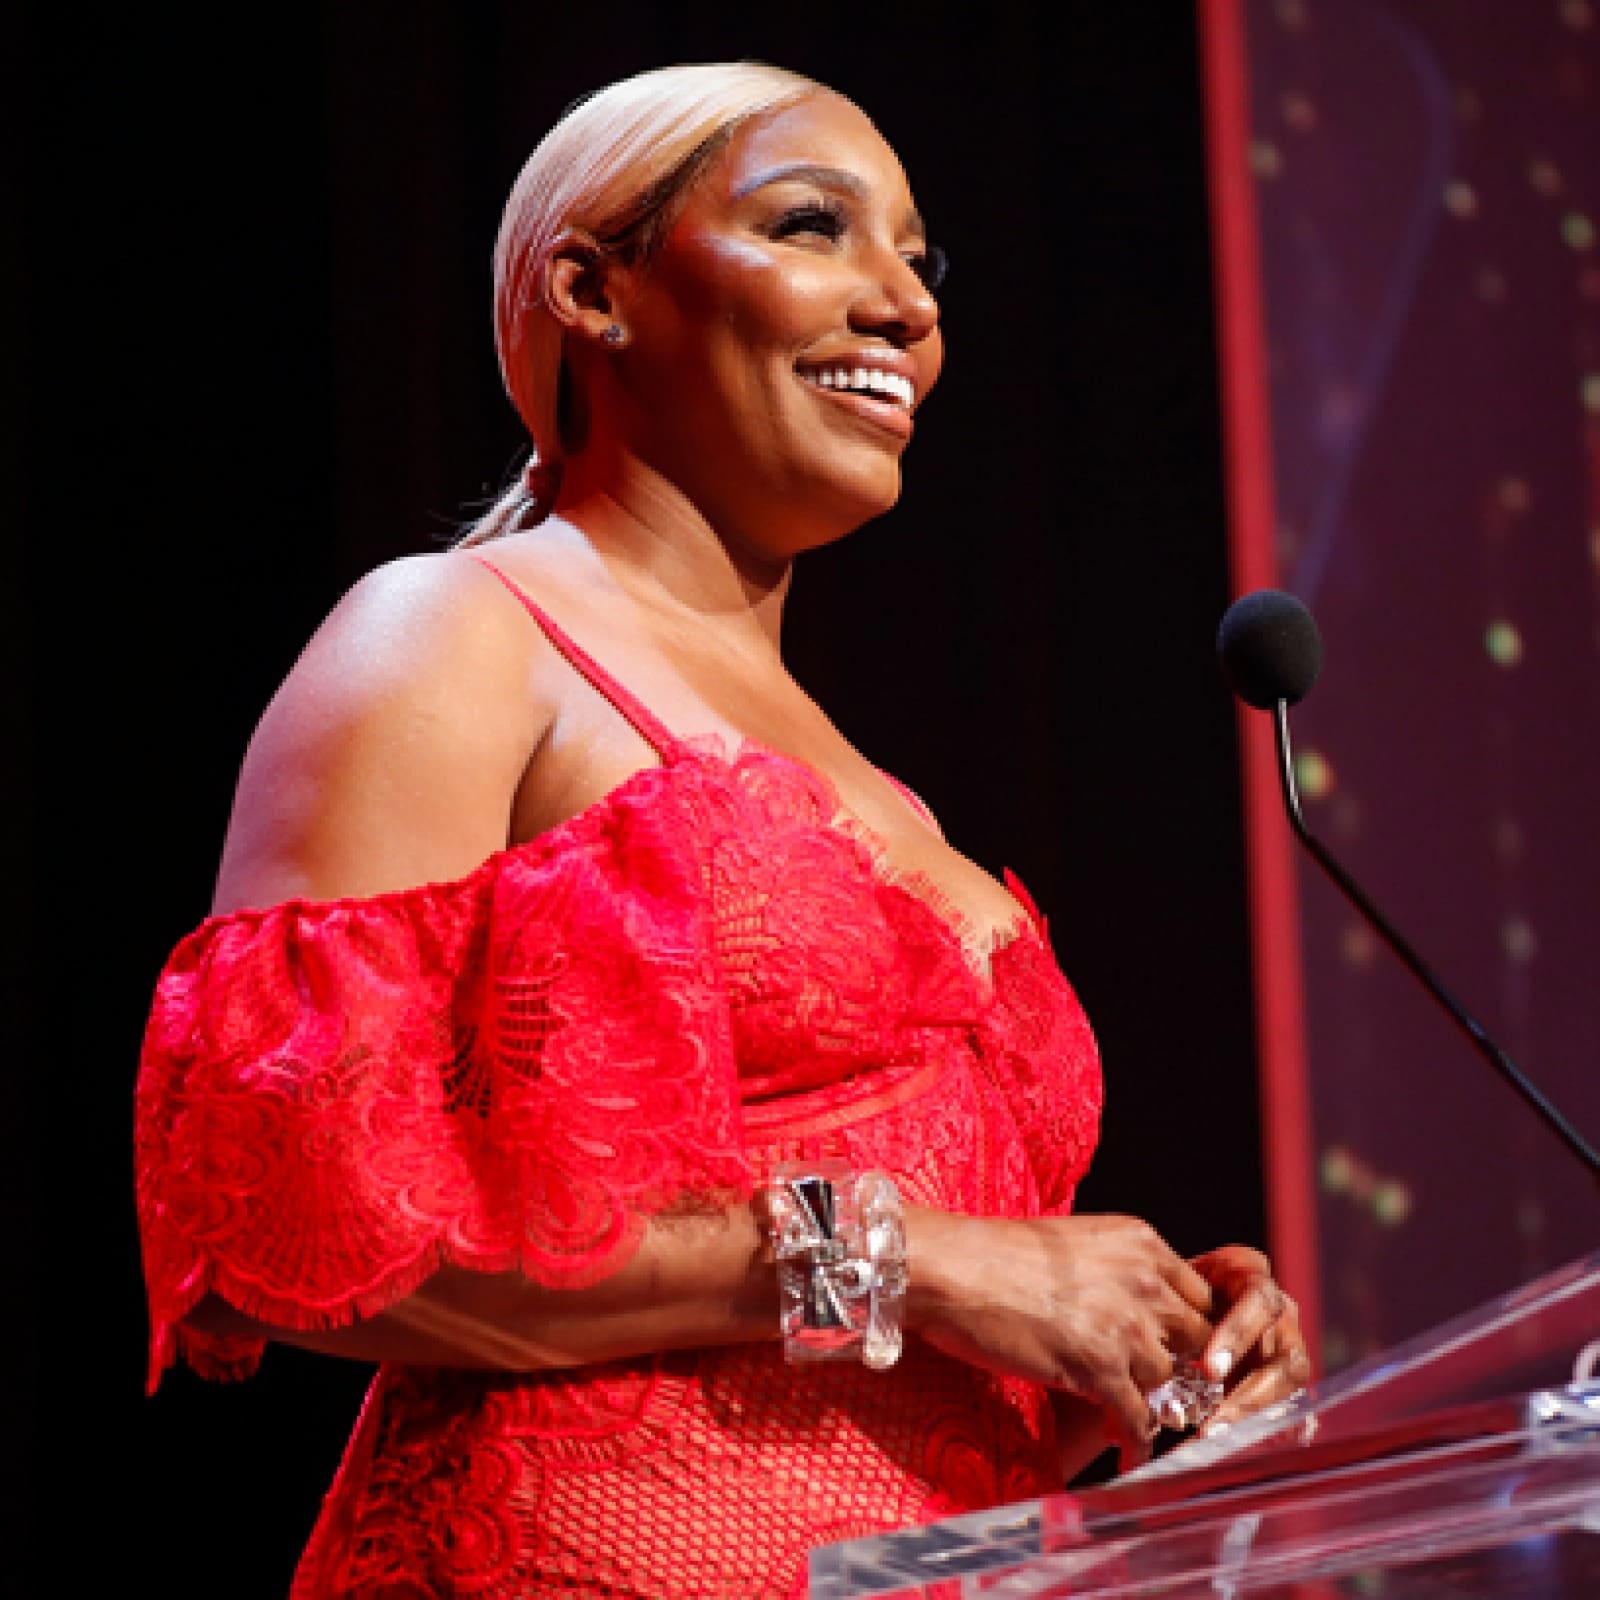 NeNe Leakes Tells Fans She Found Someone She Never Wants To Lose Again - Find Out Who It Is